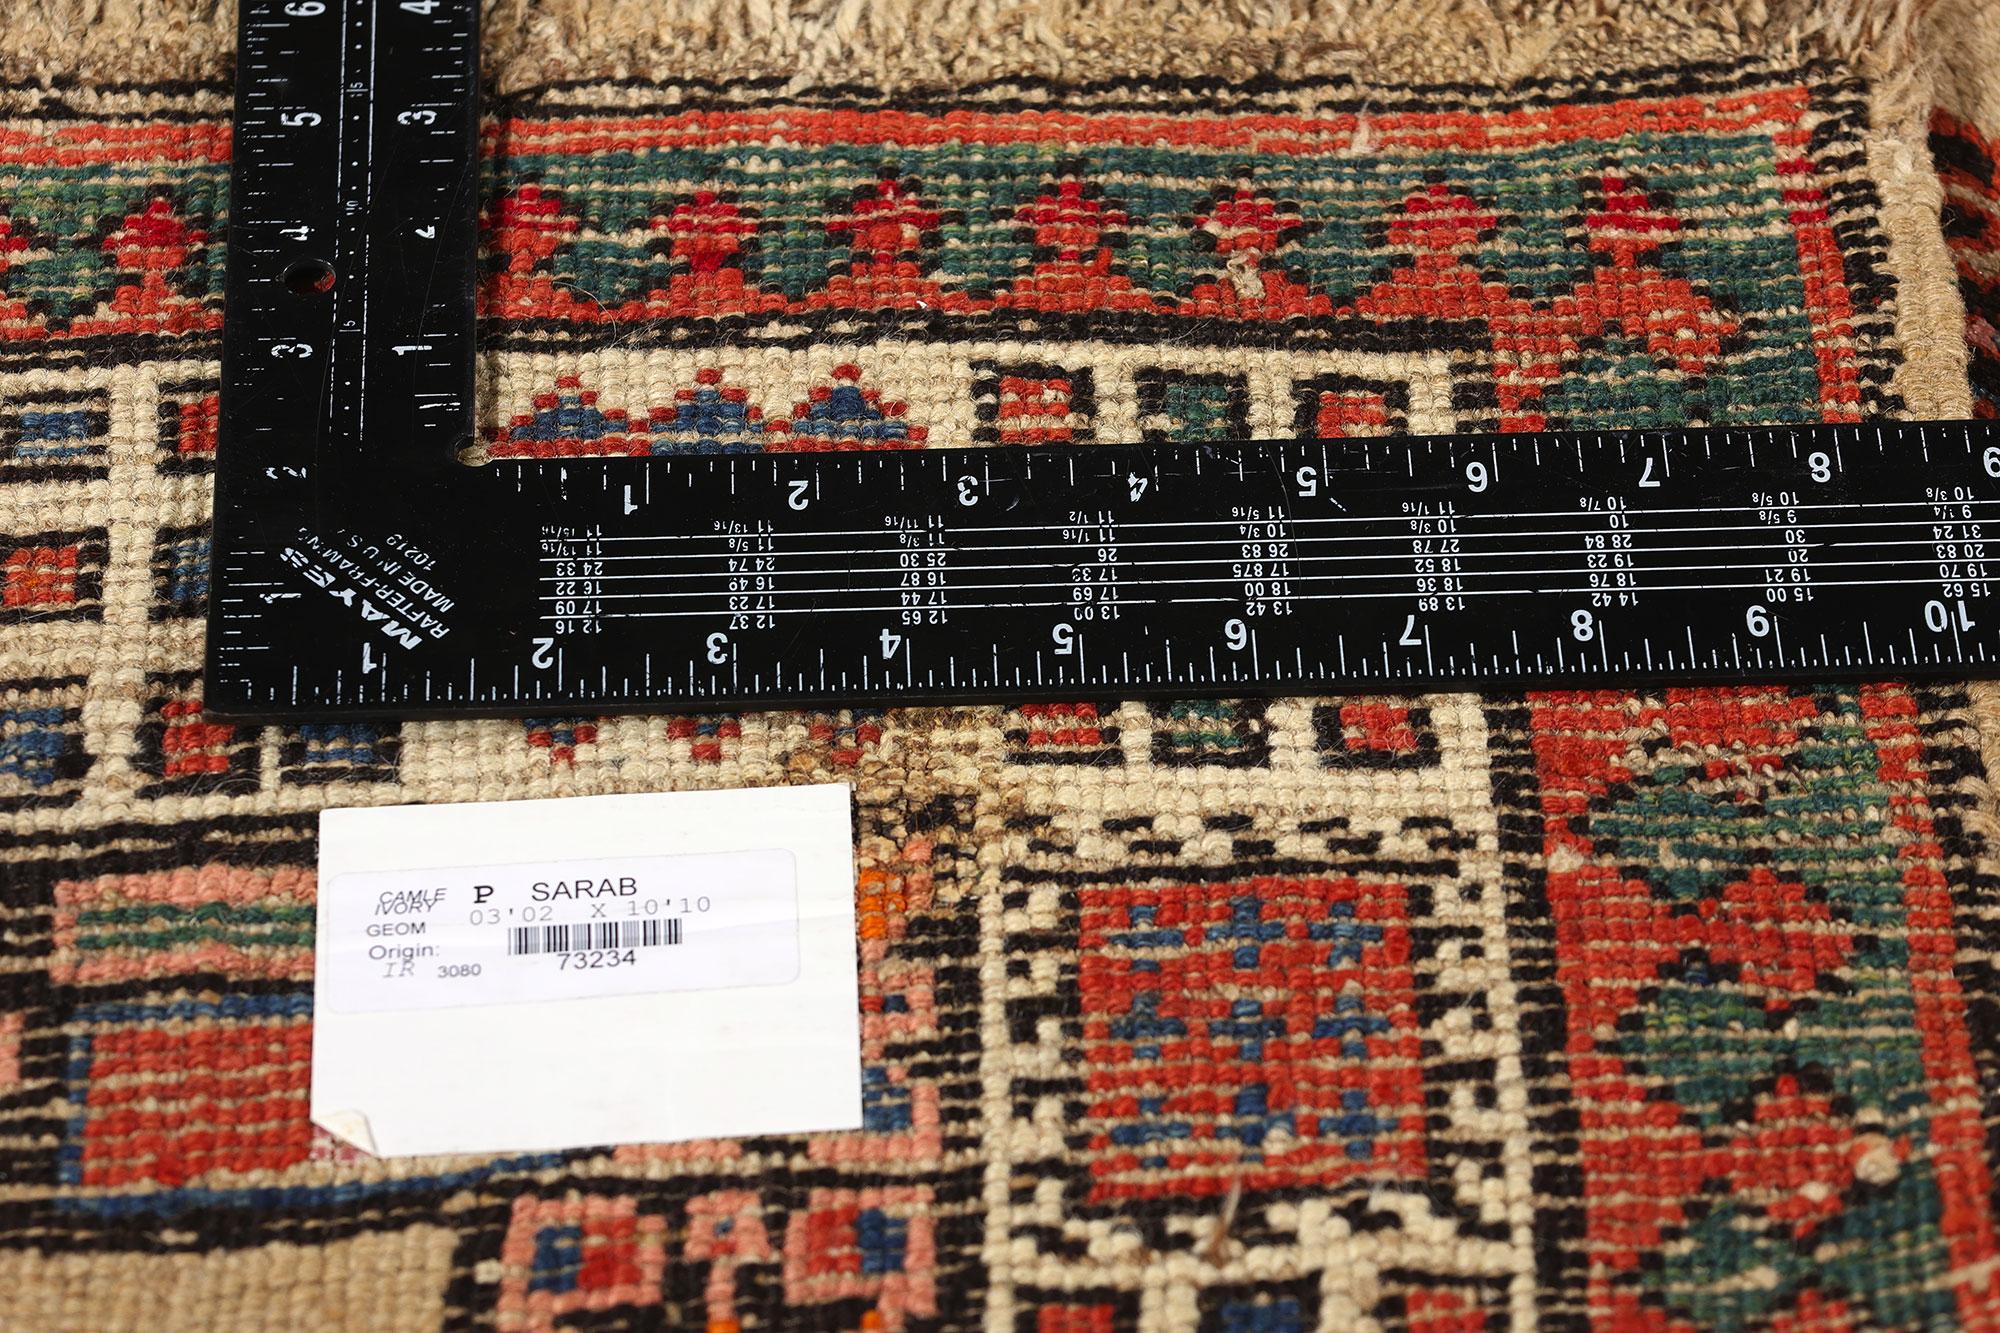 Antique Persian Sarab Rug Carpet Runner, 03’02 x 10’10 In Good Condition For Sale In Dallas, TX